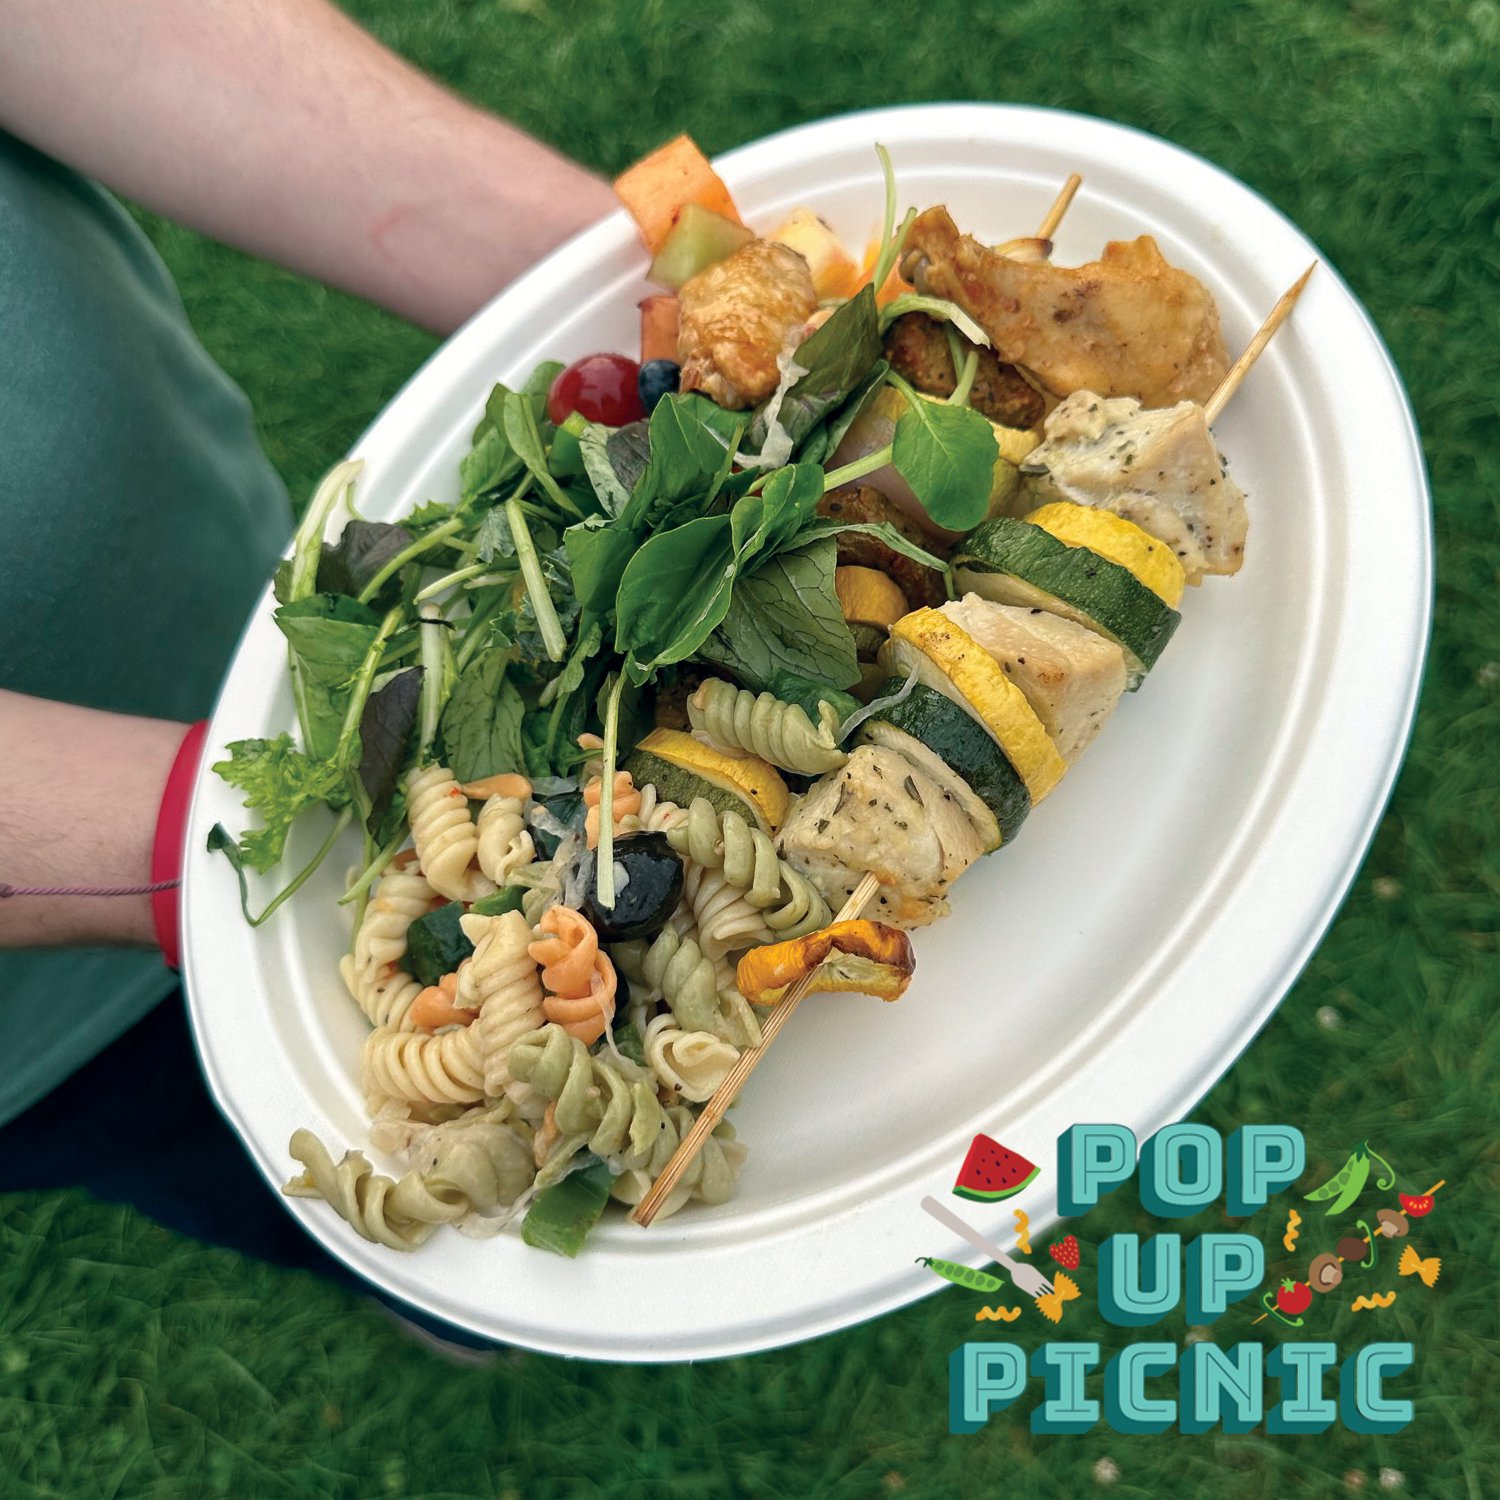 Our Pop Up Picnics are just a few months out, and we are so excited for another summer of collaborative, community building meals at Portland's public gardens! Here's the 2024 schedule:

7/8 - Payson Park Community Garden
7/22 - Casco Bay Community G